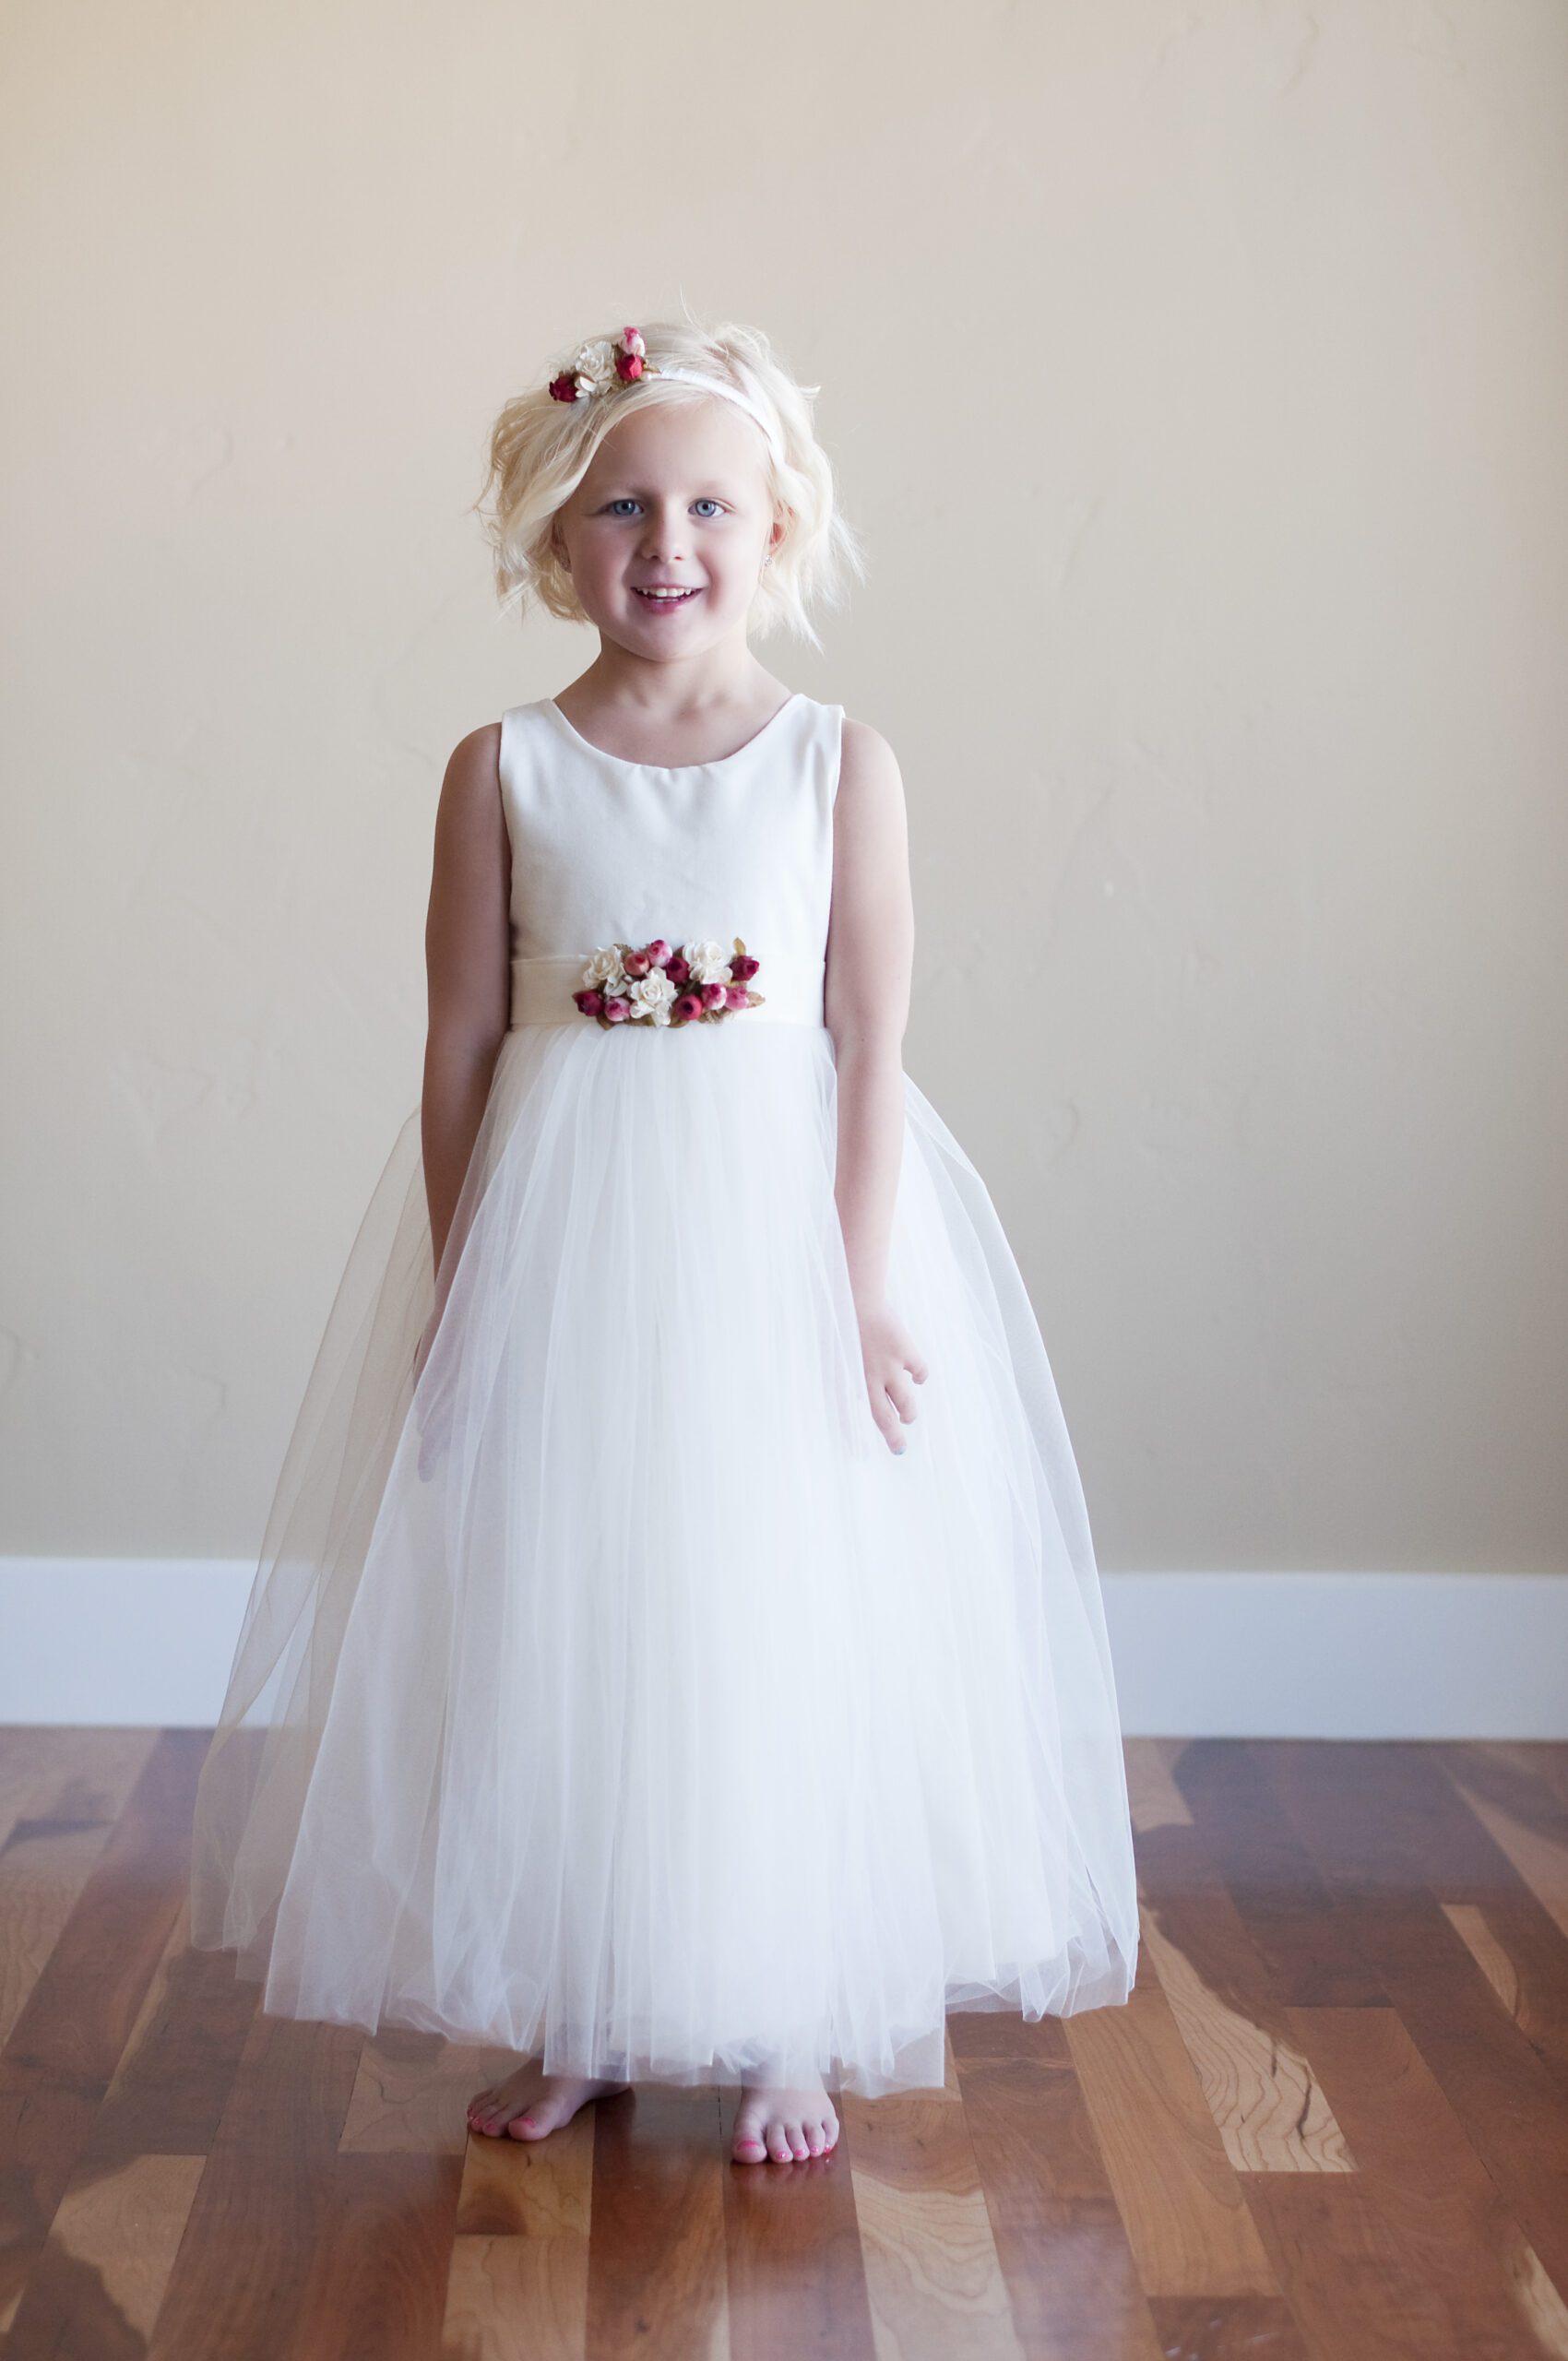 A photo of a flower girl wearing a cotton and tulle dress with pretty red roses